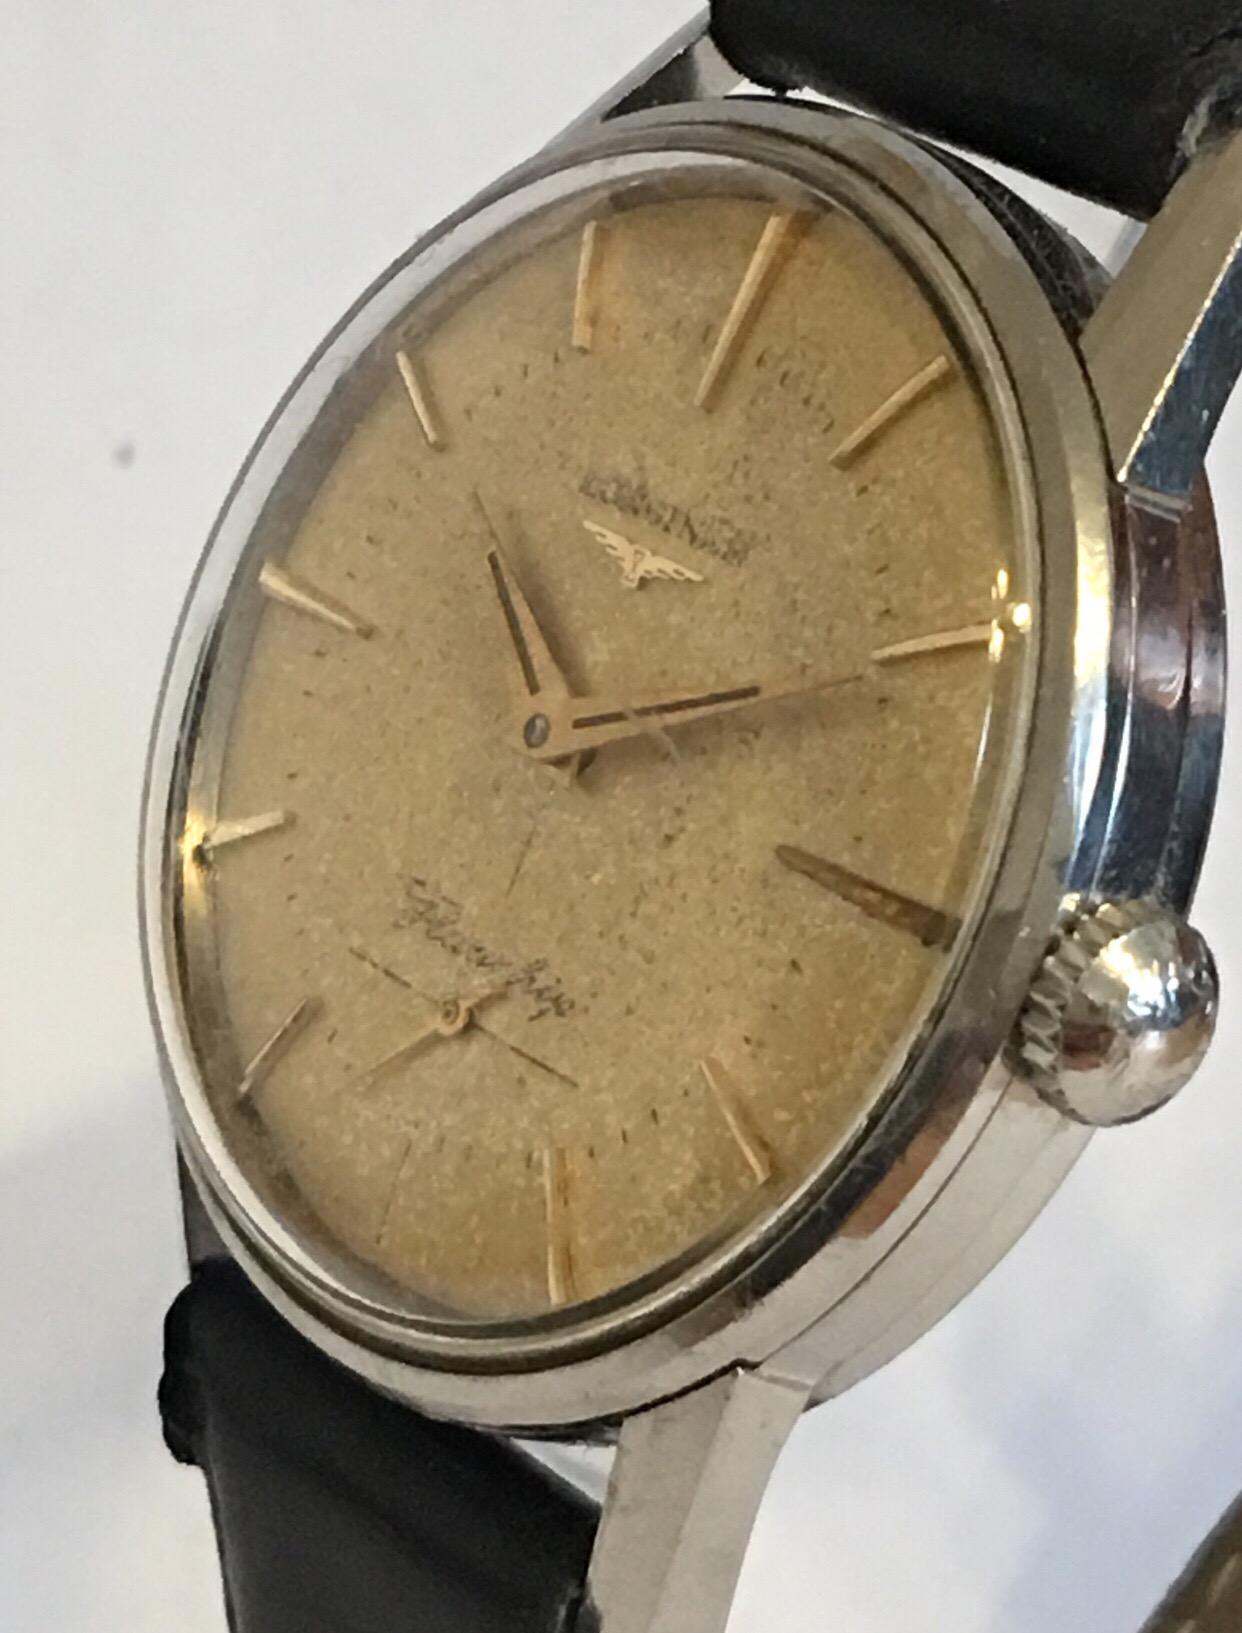 This stunning vintage watch is working and and ticking well. The Dial has aged. The strap is a bit worn and it has a gold plated buckle on it. 

Please study the images carefully as form part of the description.